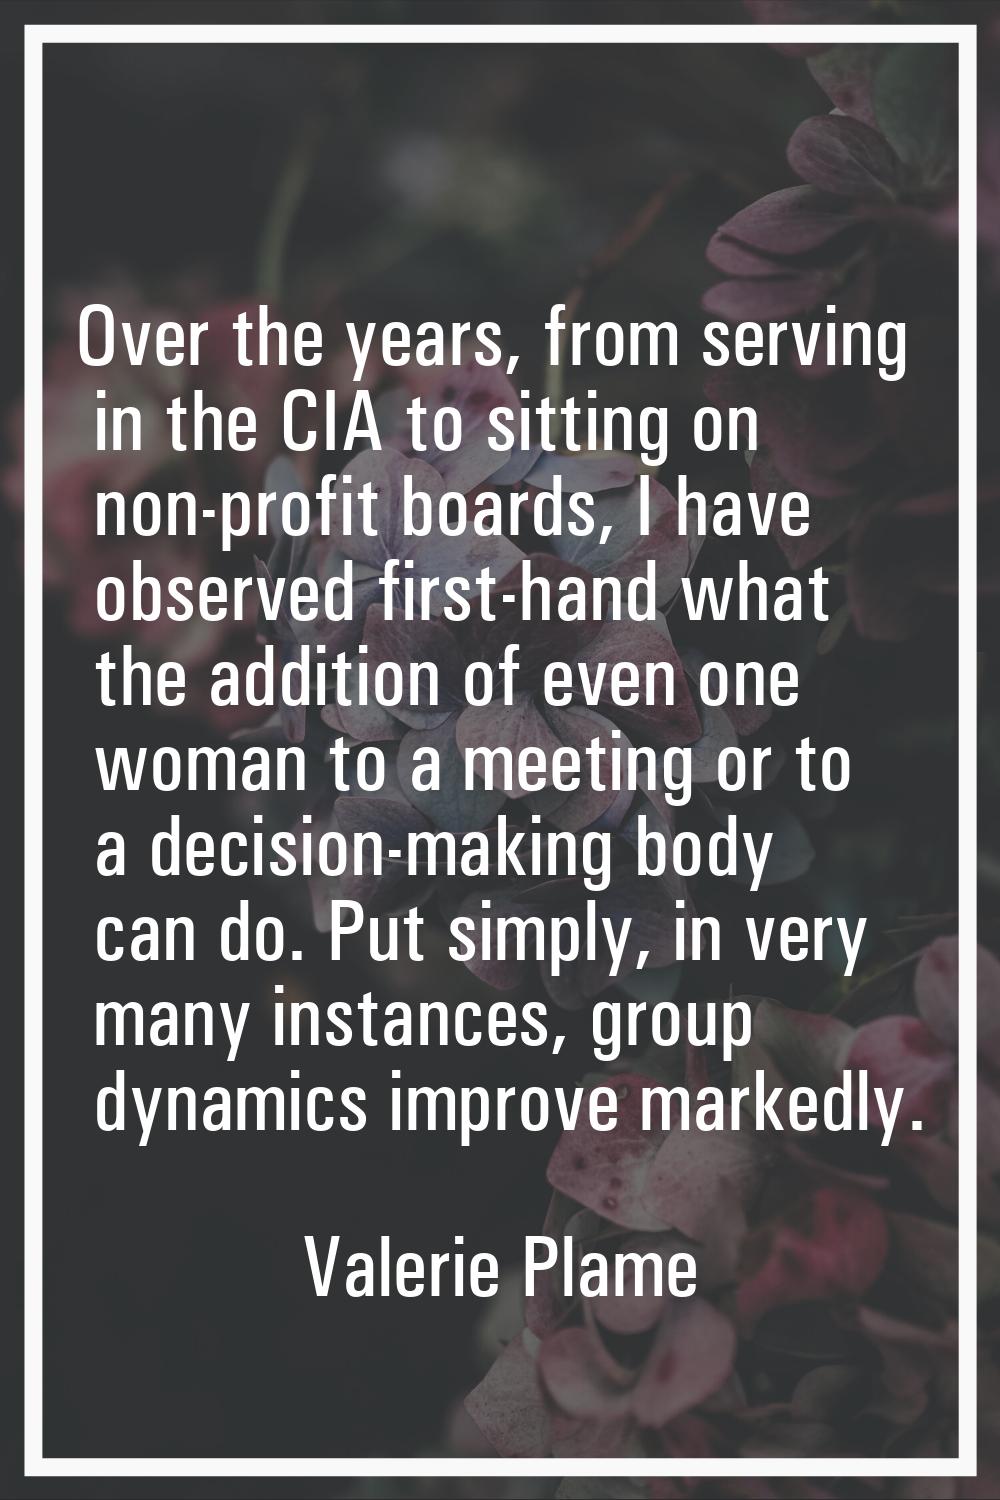 Over the years, from serving in the CIA to sitting on non-profit boards, I have observed first-hand